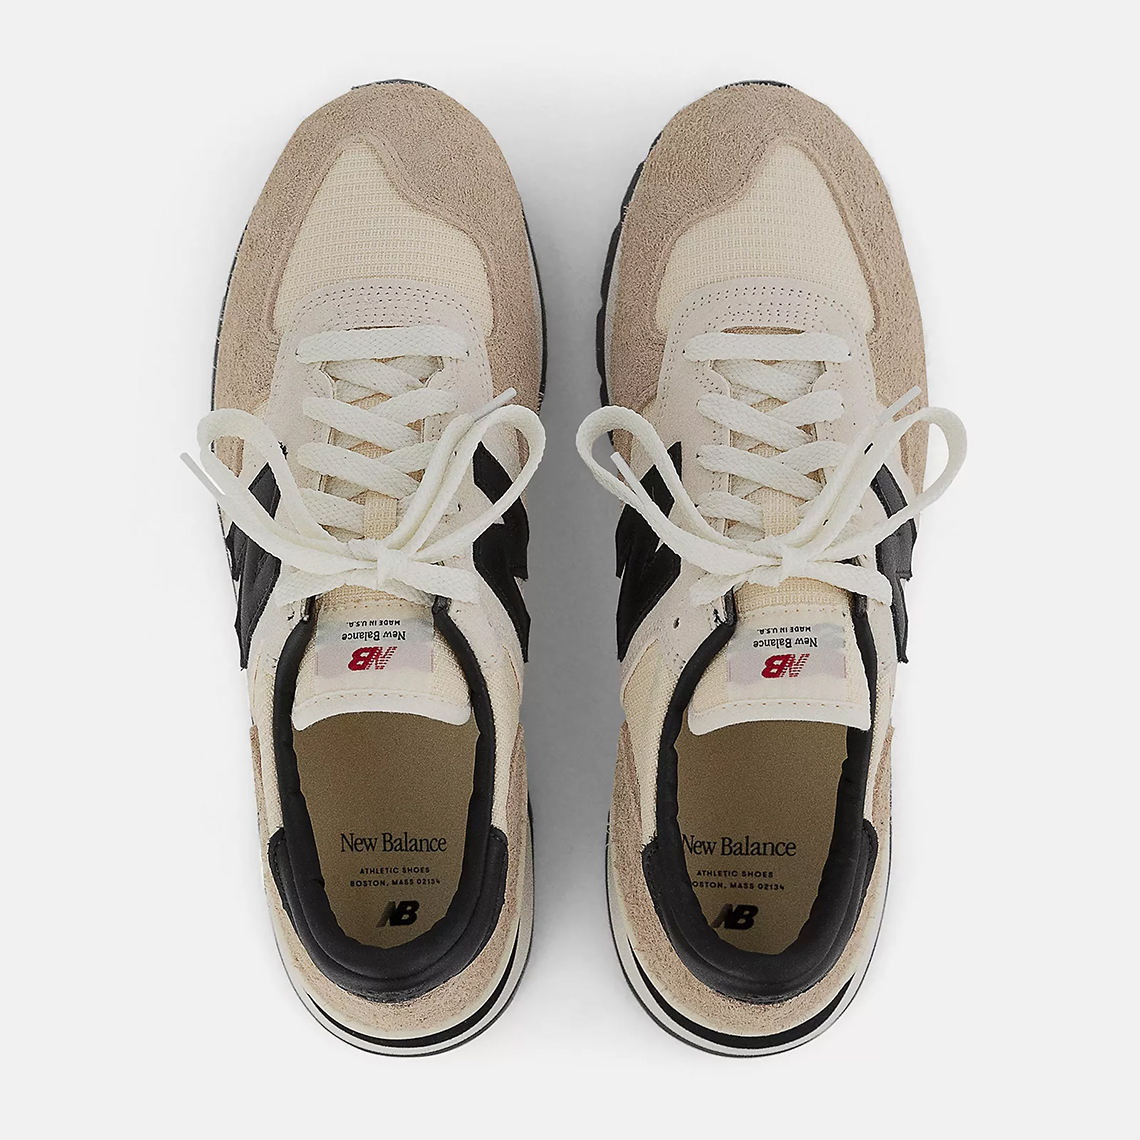 For more from the Boston-based brand, check out the New Balance 550 Made In Usa Incense Macadamia Nut M990ad1 3